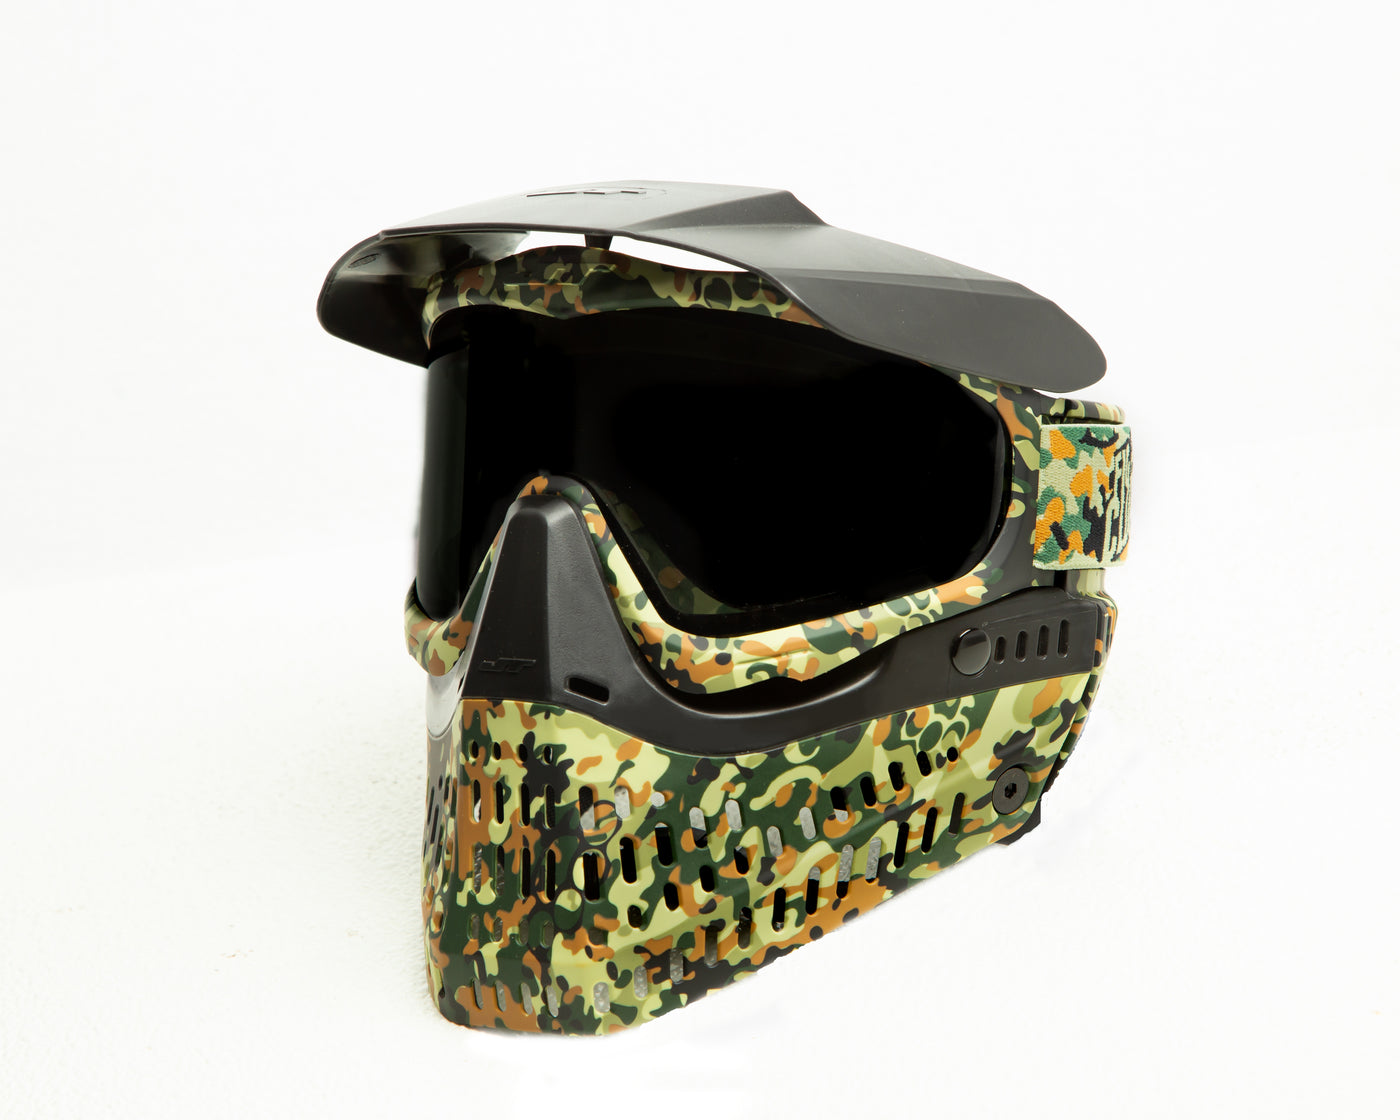 JT Proflex Strap - Heroines 3D – Committed Paintball